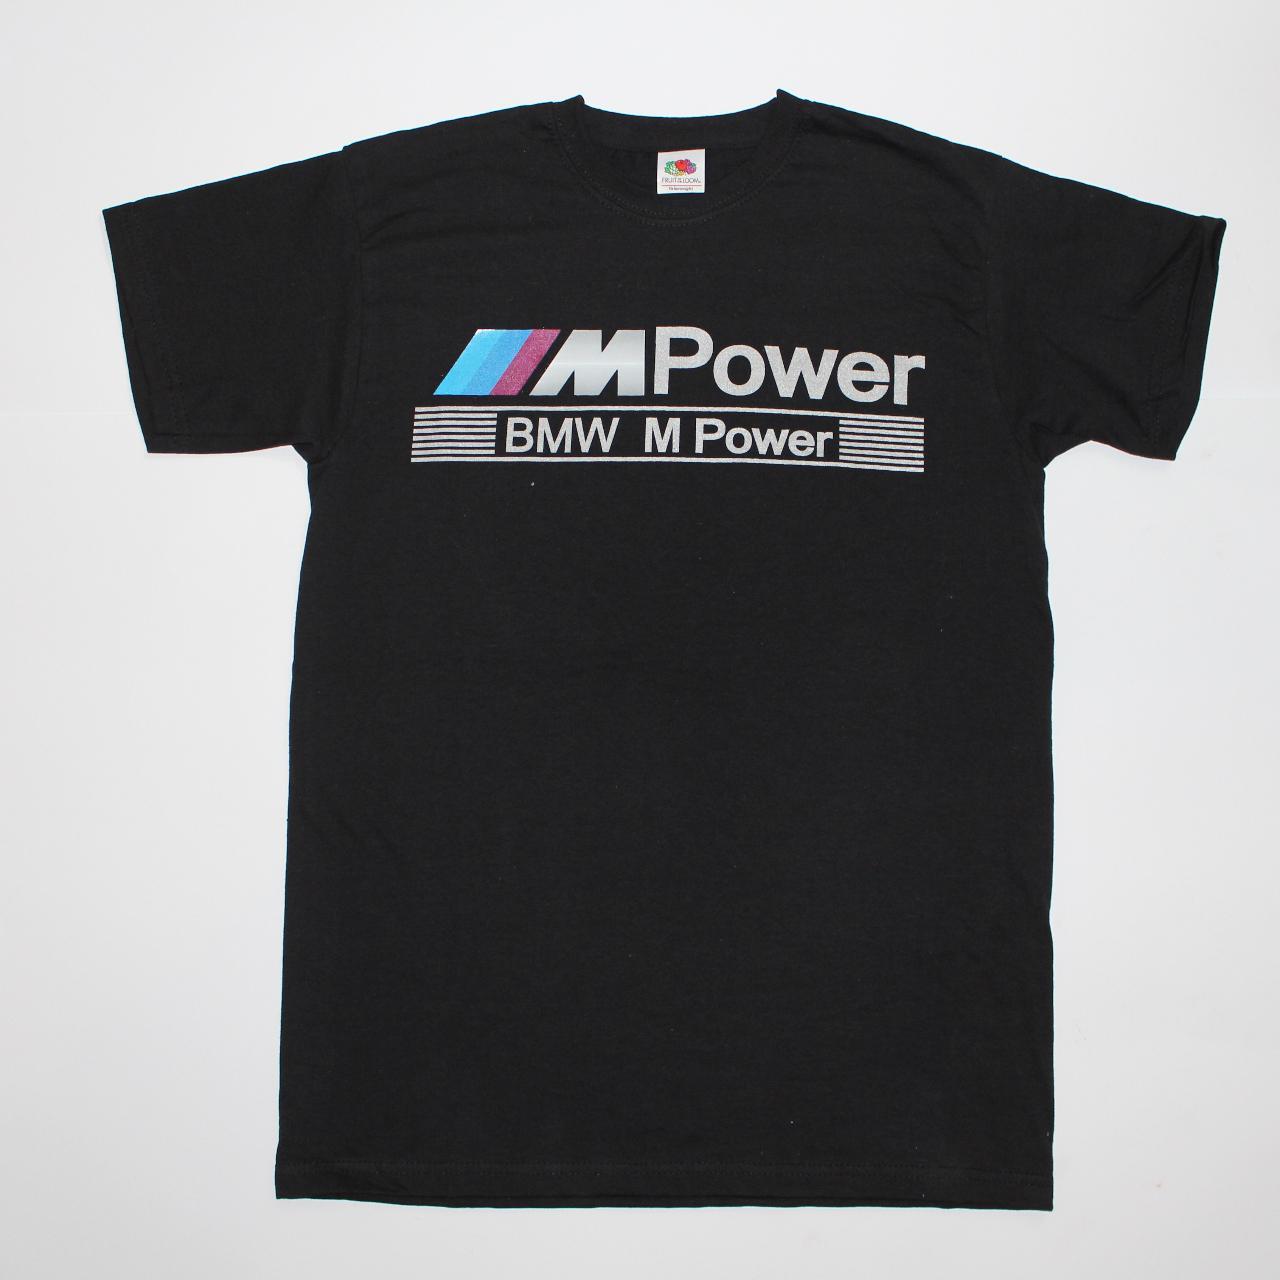 Product Image 1 - Brand new Casual,BMW,M-Power,Men's T-shirt,Size-L
Free UK